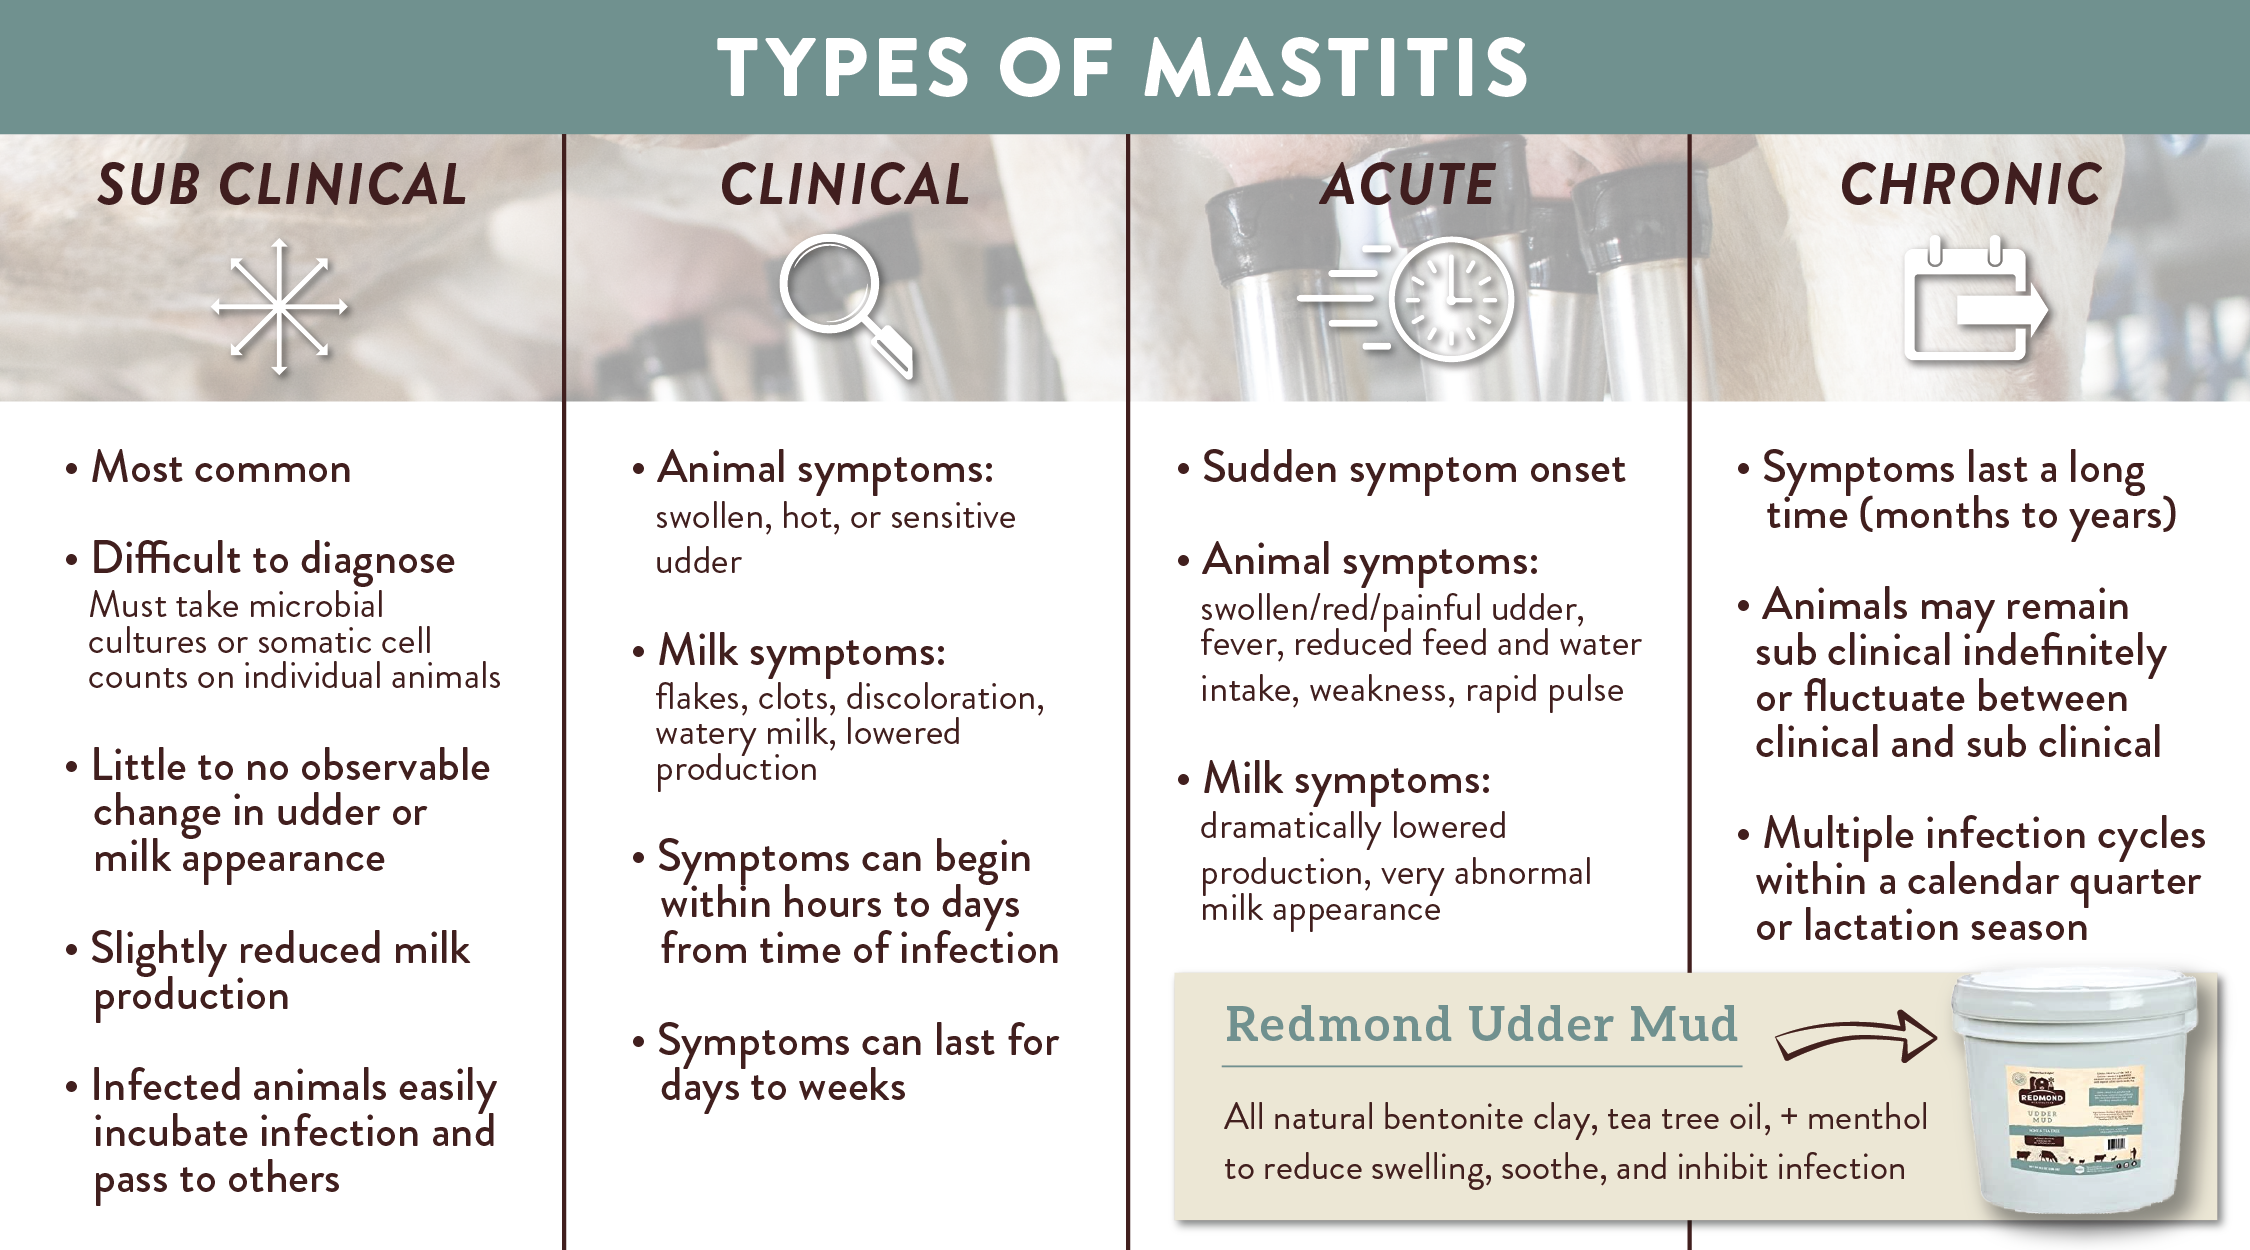 Types of mastitis in cows